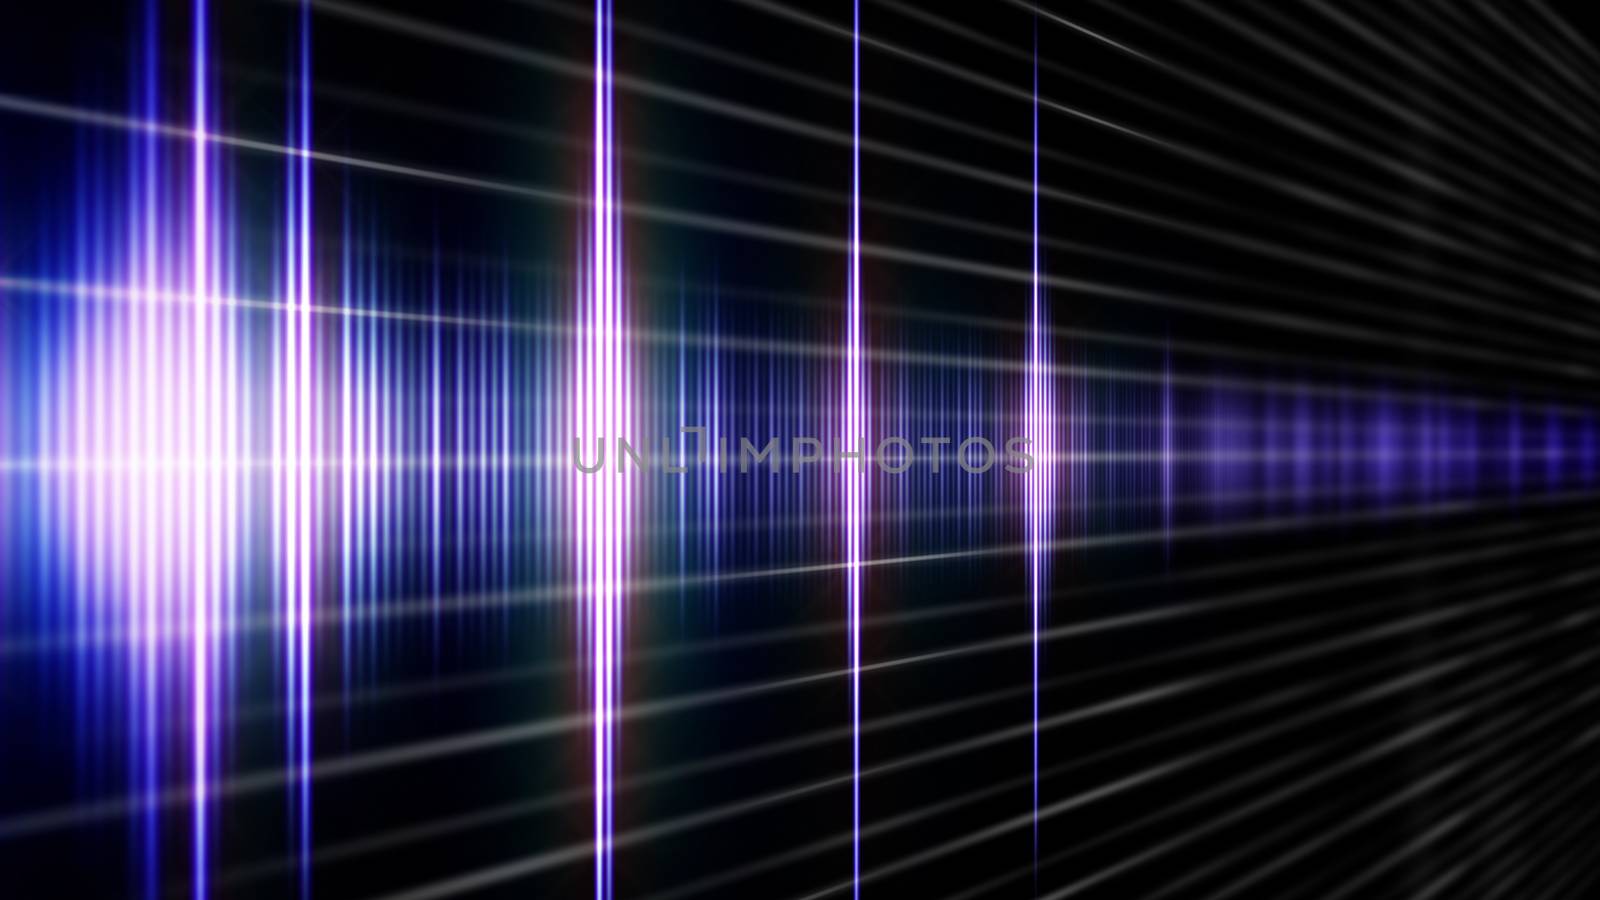 Blue Digital sound wave in perspective view on a black background. Abstract  background related with music or voice concept. 3d illustration.